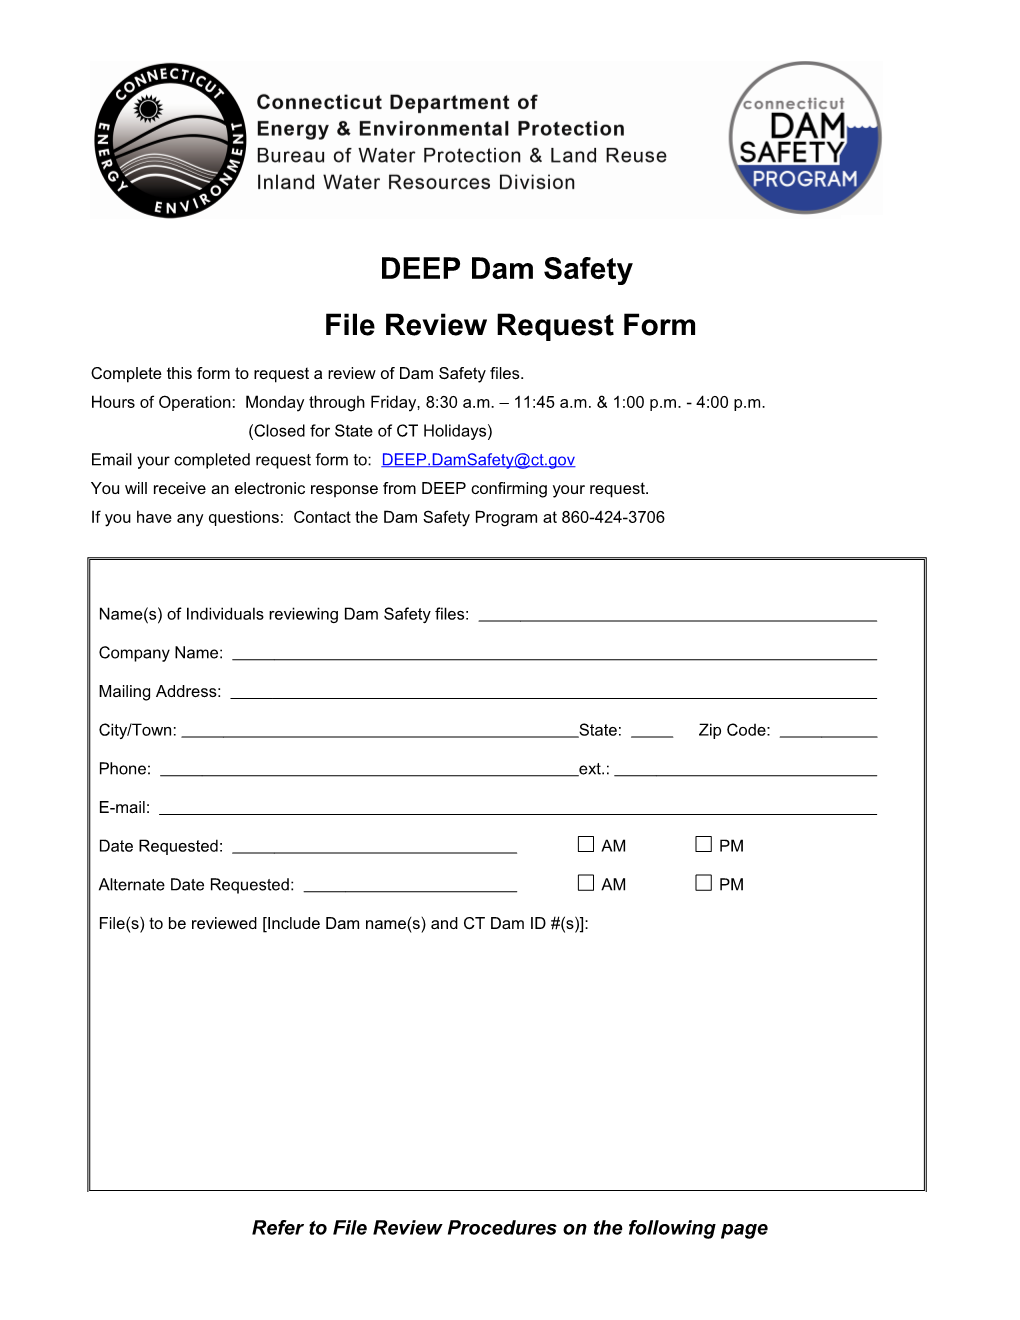 File Review Request Form